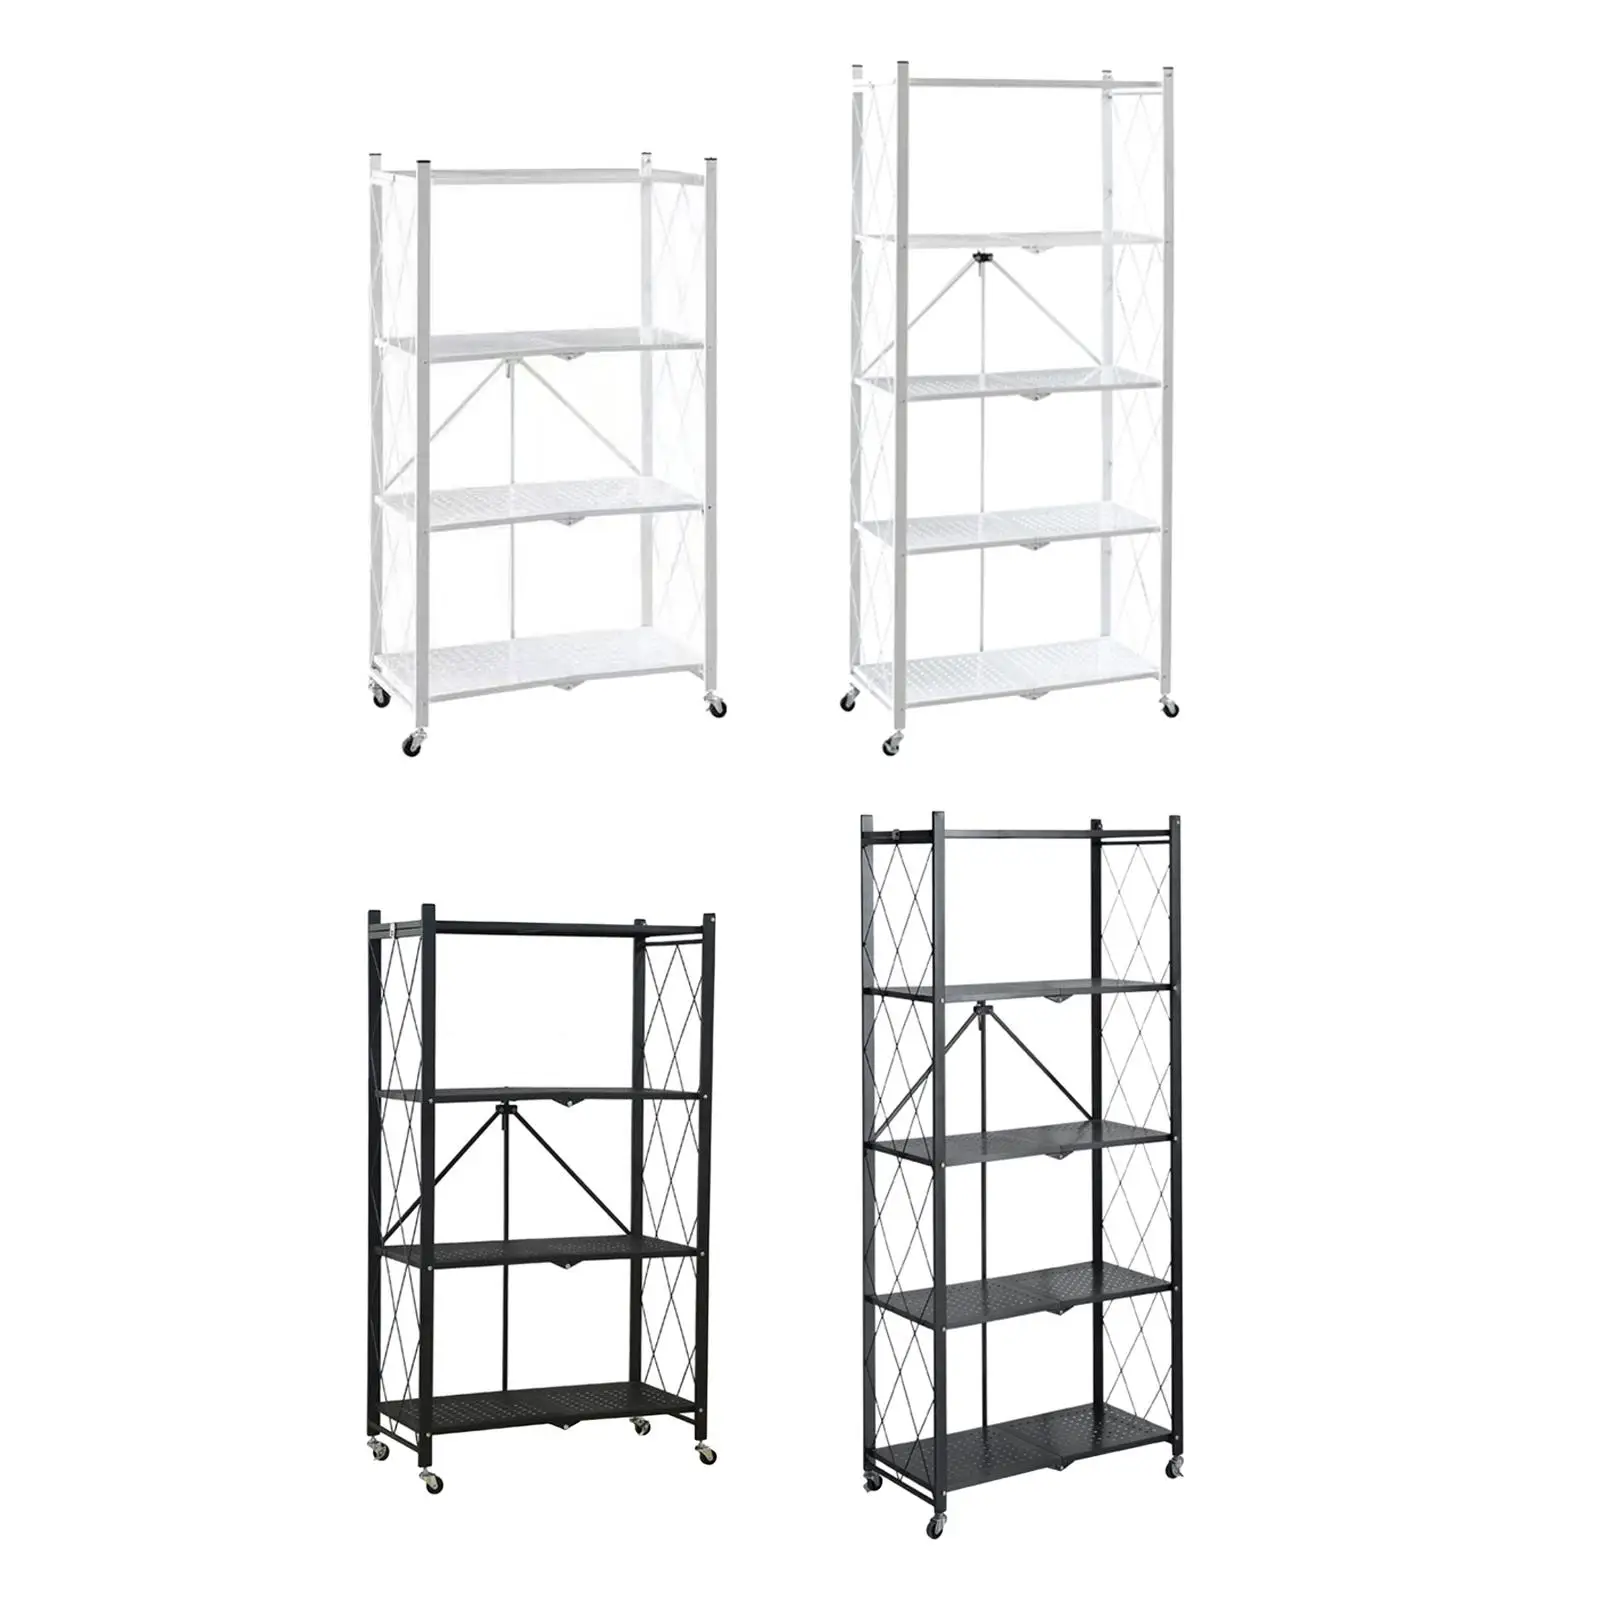 Foldable Bookshelf Organization Cart Kitchen Cart with Caster Wheels for Living Room